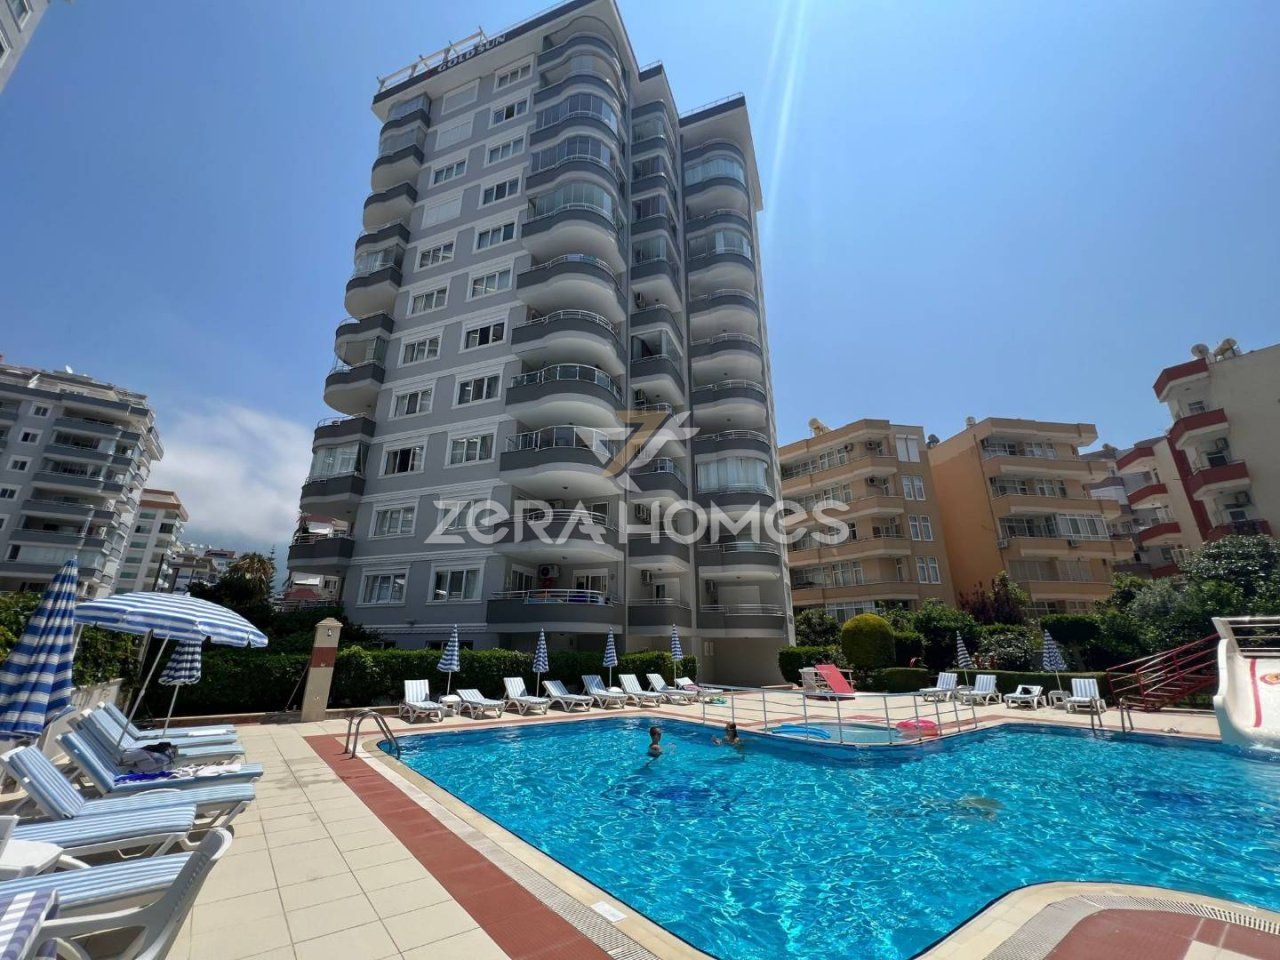 Apartment in Alanya, Turkey, 120 sq.m - picture 1